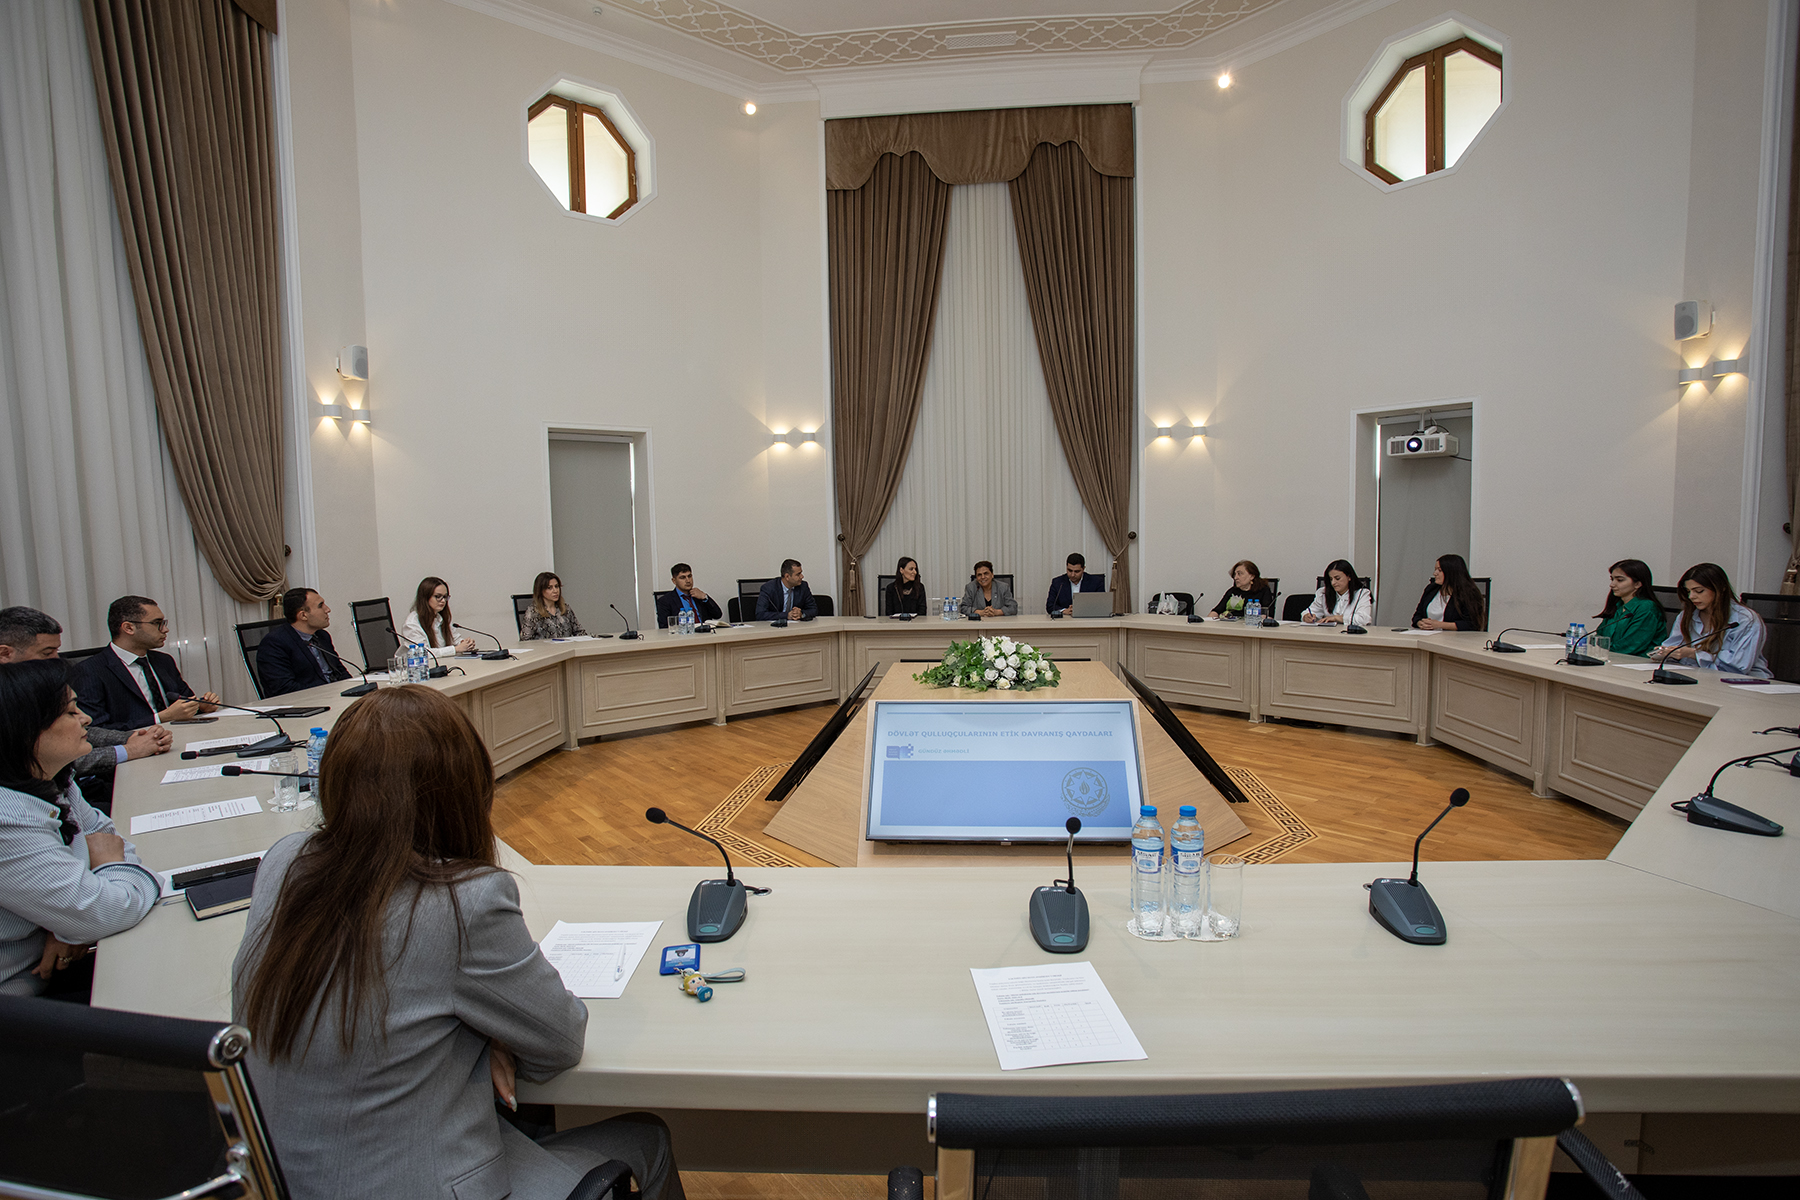  Next training was held in order to improve the professional skills of civil servants